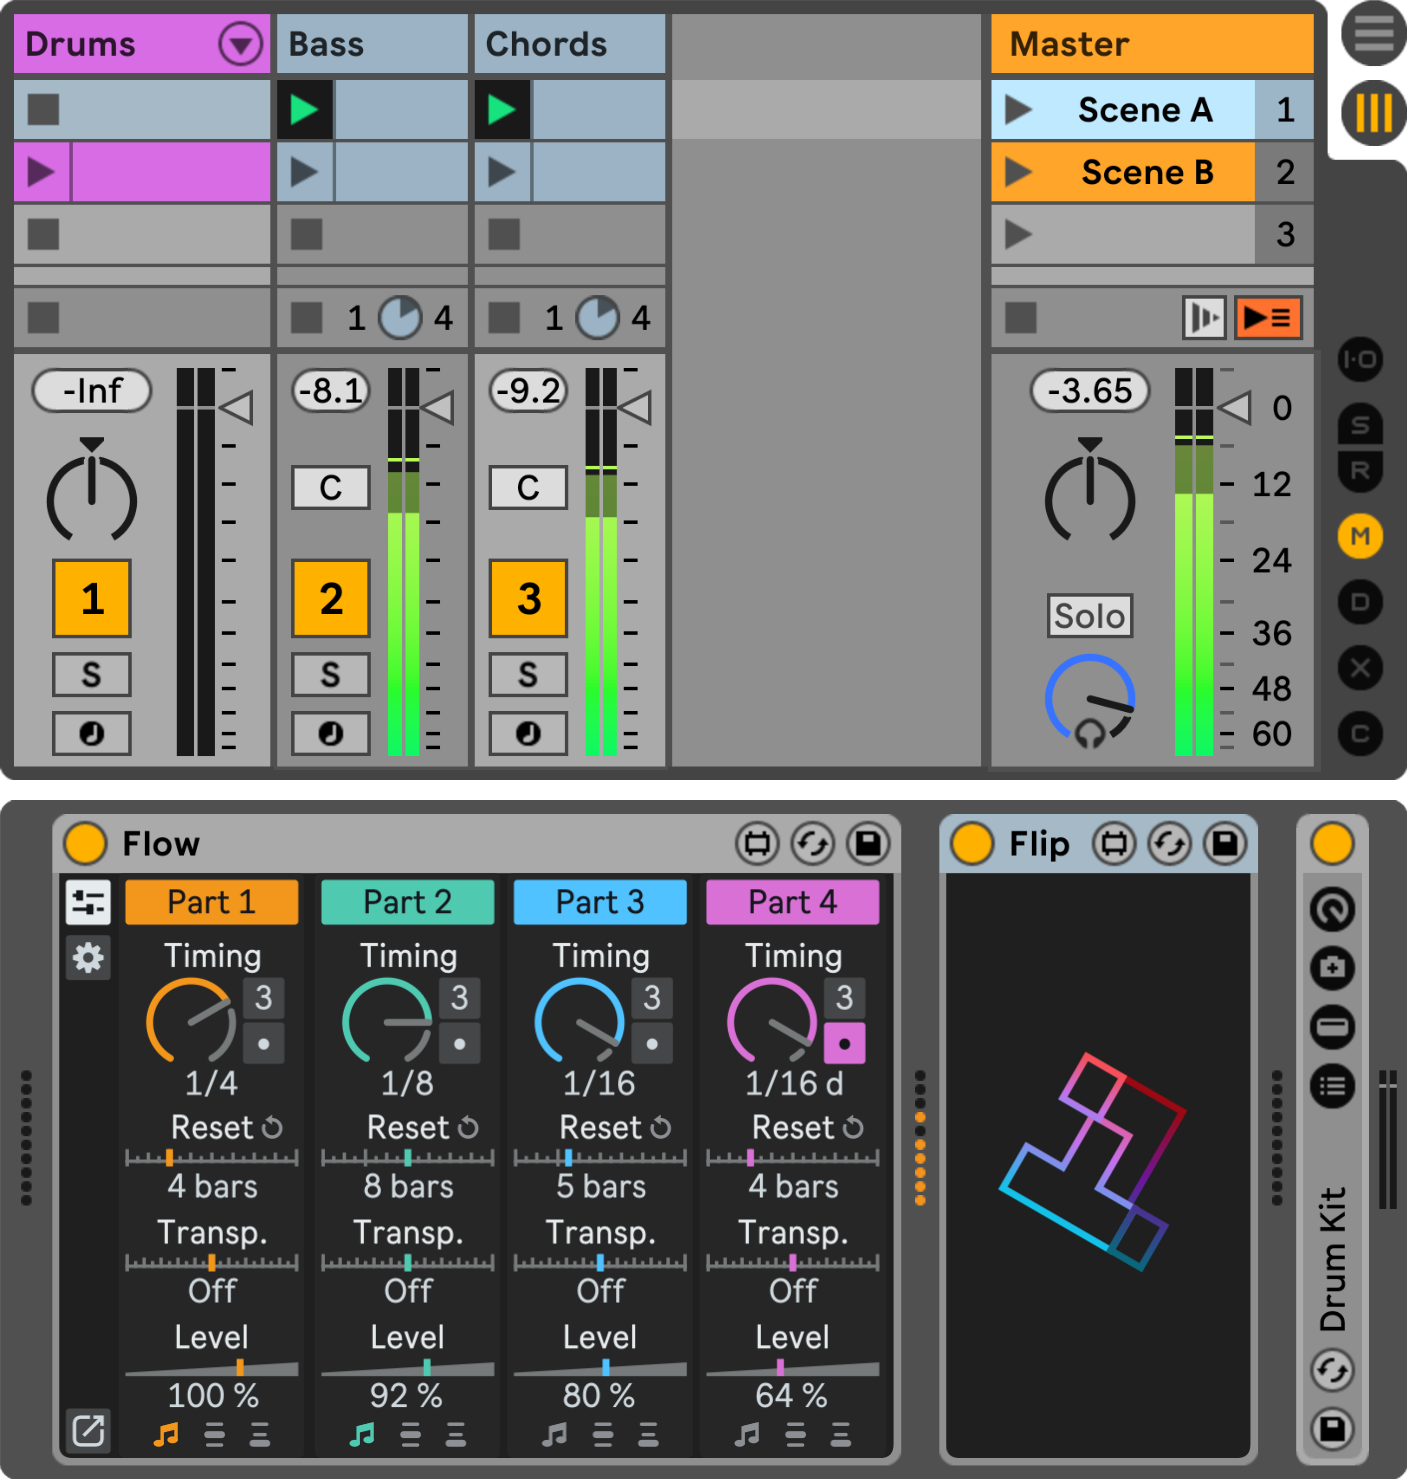 Flip mutes input MIDI signals because there are no launched Session View clips on Track 1